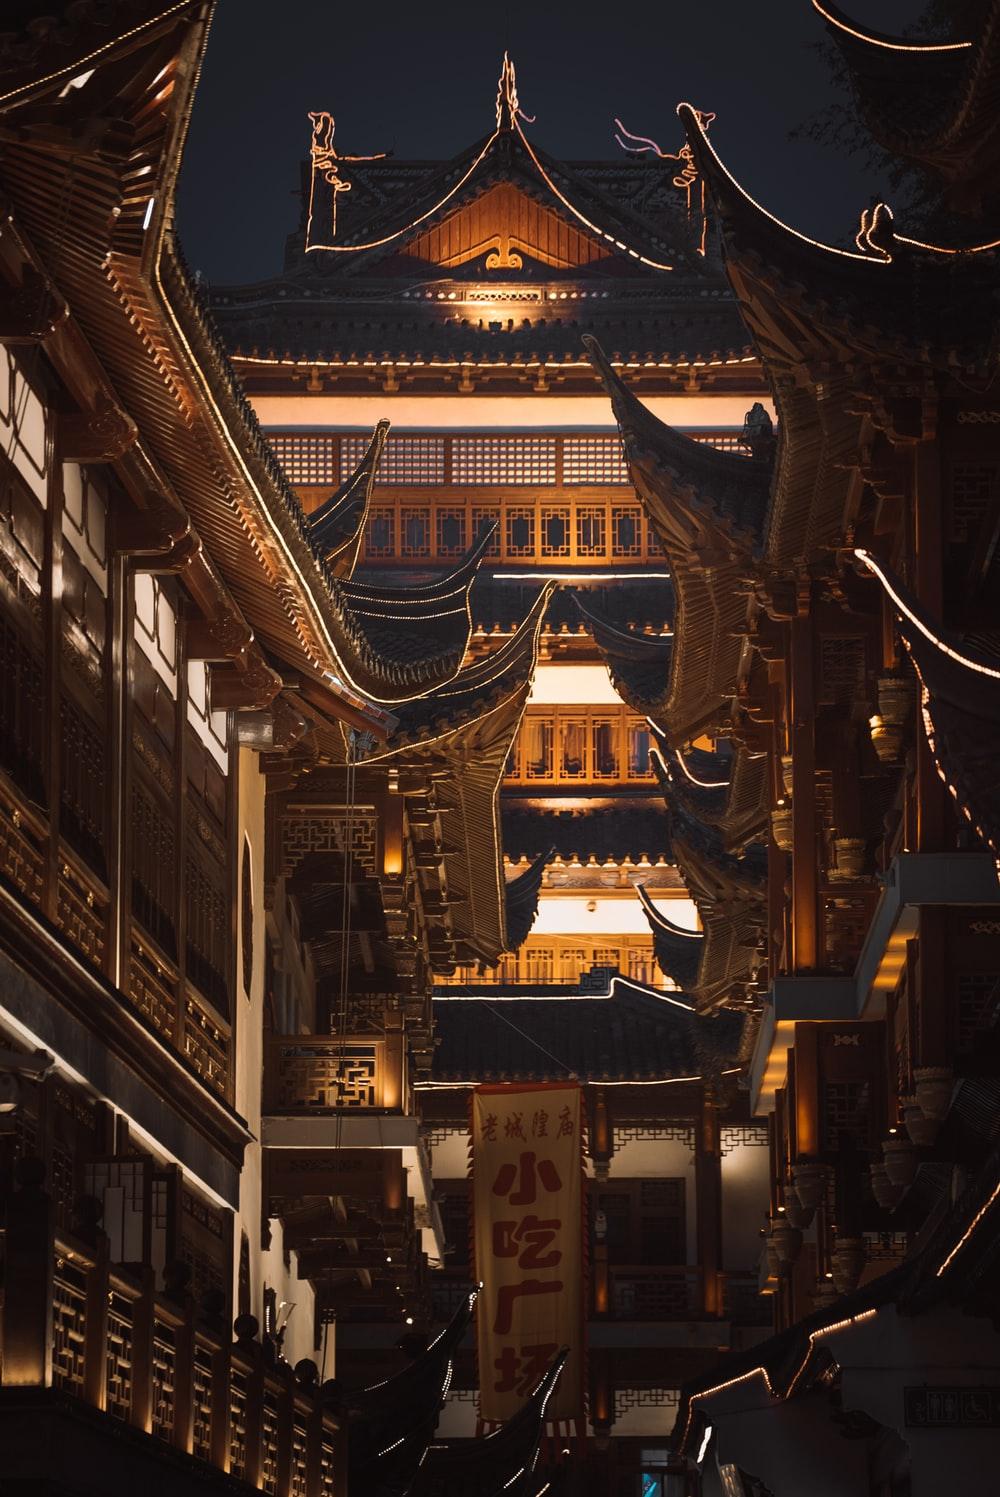 The old town of Yuyuan Garden in Shanghai is a must-see. - Chinese